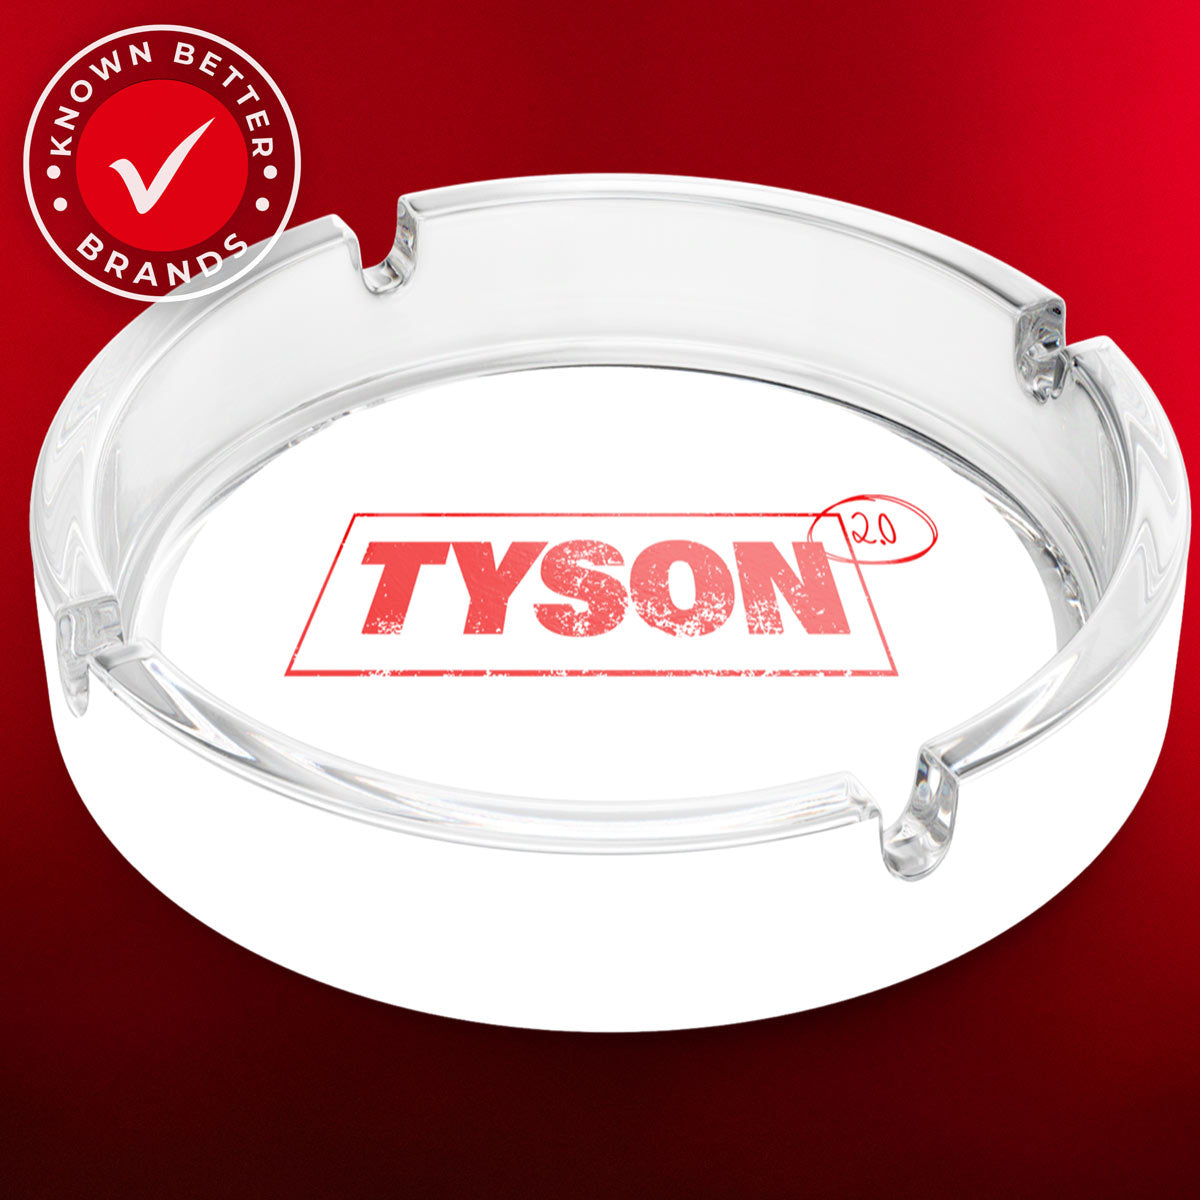 TYSON 2.0 Logo Hit ashtray features a red TYSON 2.0 logo decal in the middle